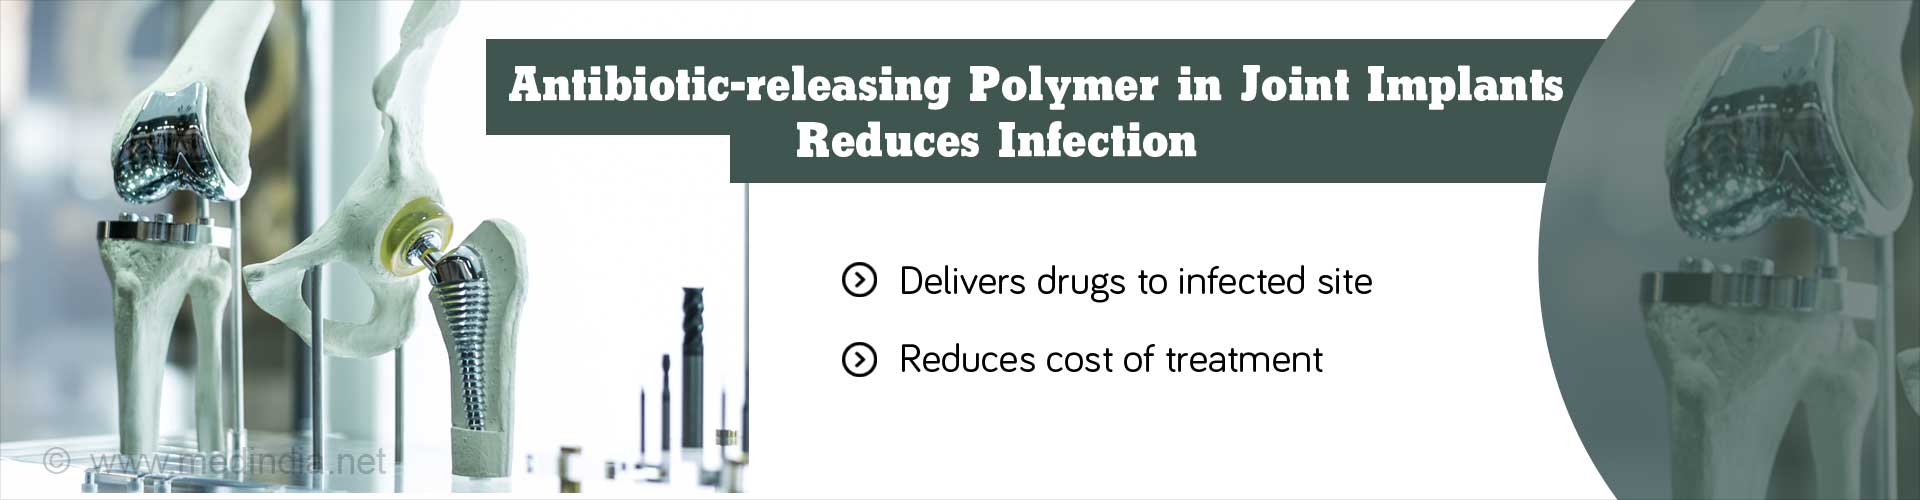 Antibiotic-releasing Polymer in Joint Implants
- Delivers drug to an infected site
- Eliminates infection in animal models
- Reduces the cost of treatment